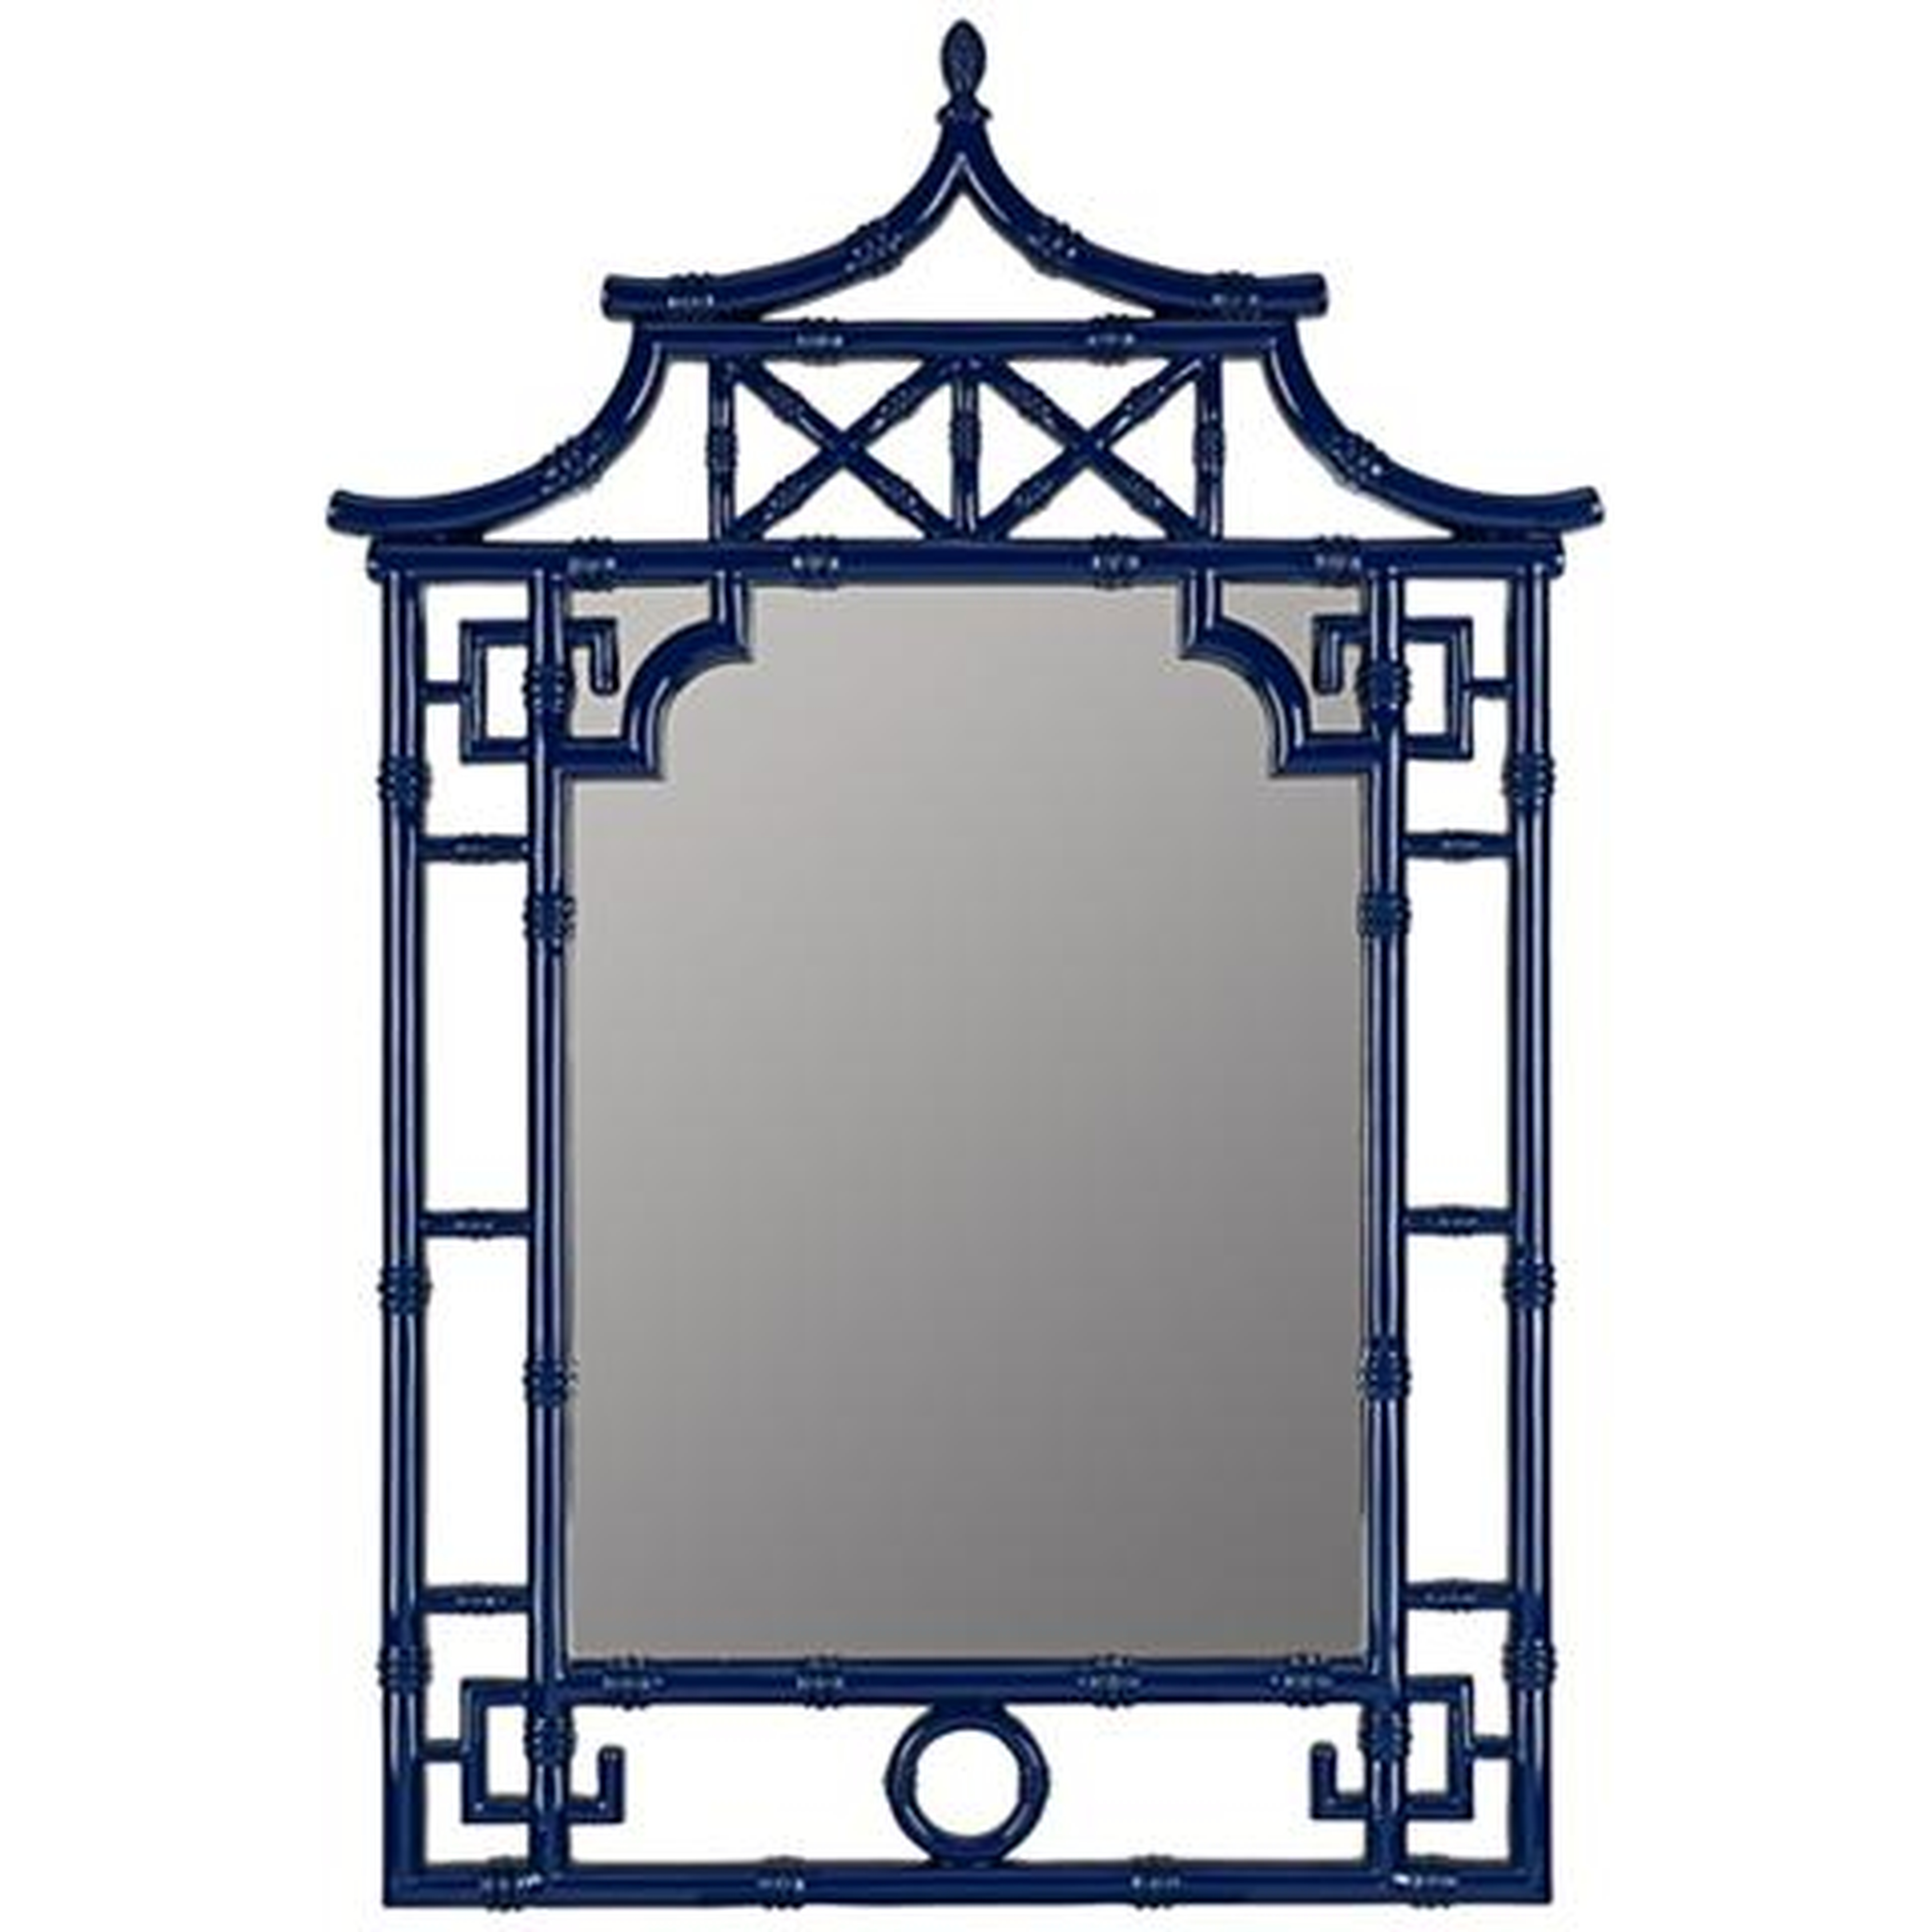 Pinlo Cobalt Blue 28 1/4" x 42" Pagoda Wall Mirror - Style # 1G204 - Lamps Plus